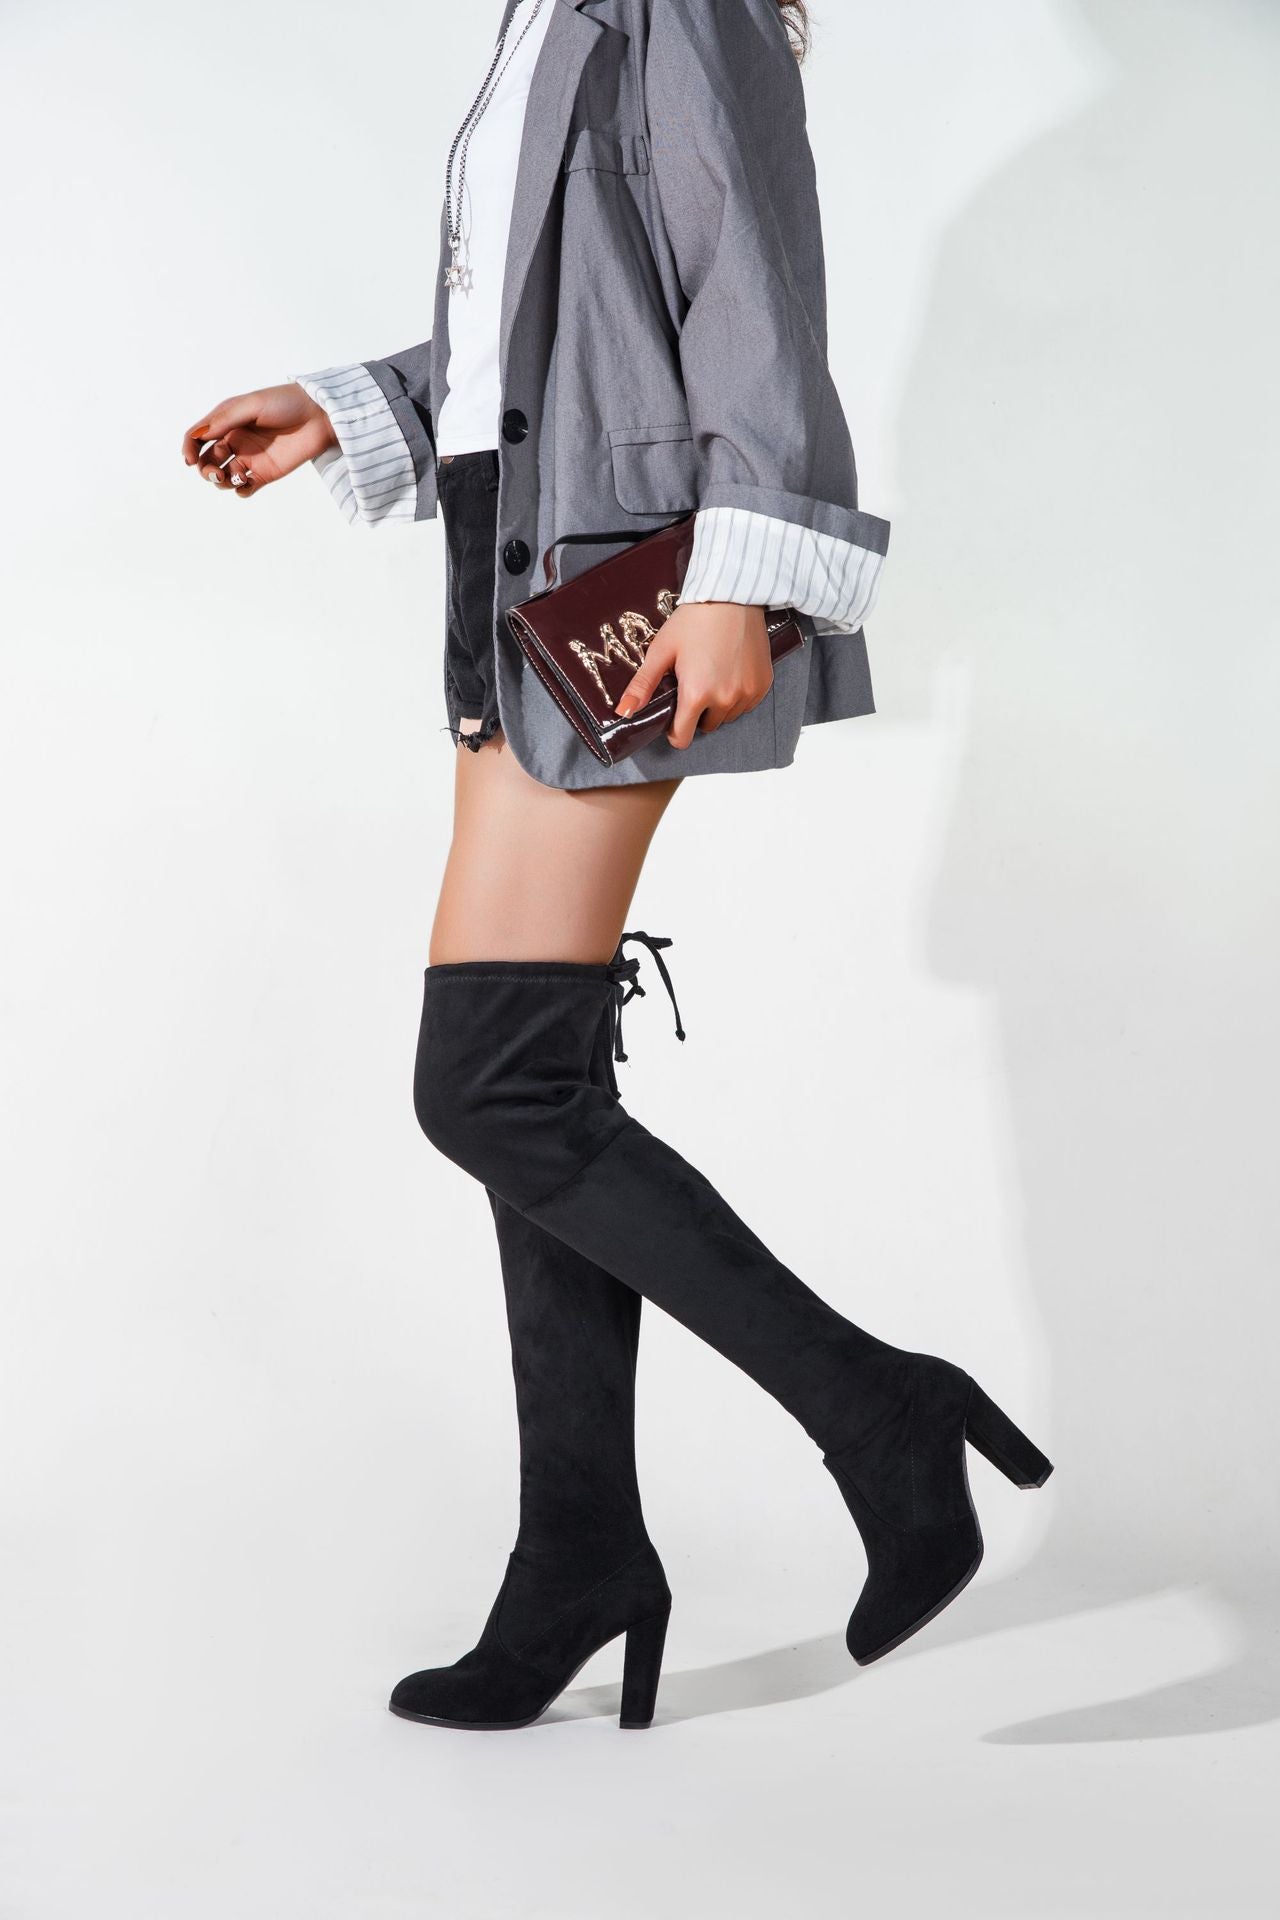 Autumn And Winter Black Over-The-Knee Boots Pointed Suede Women High-Top Fashion Boots Boots Women